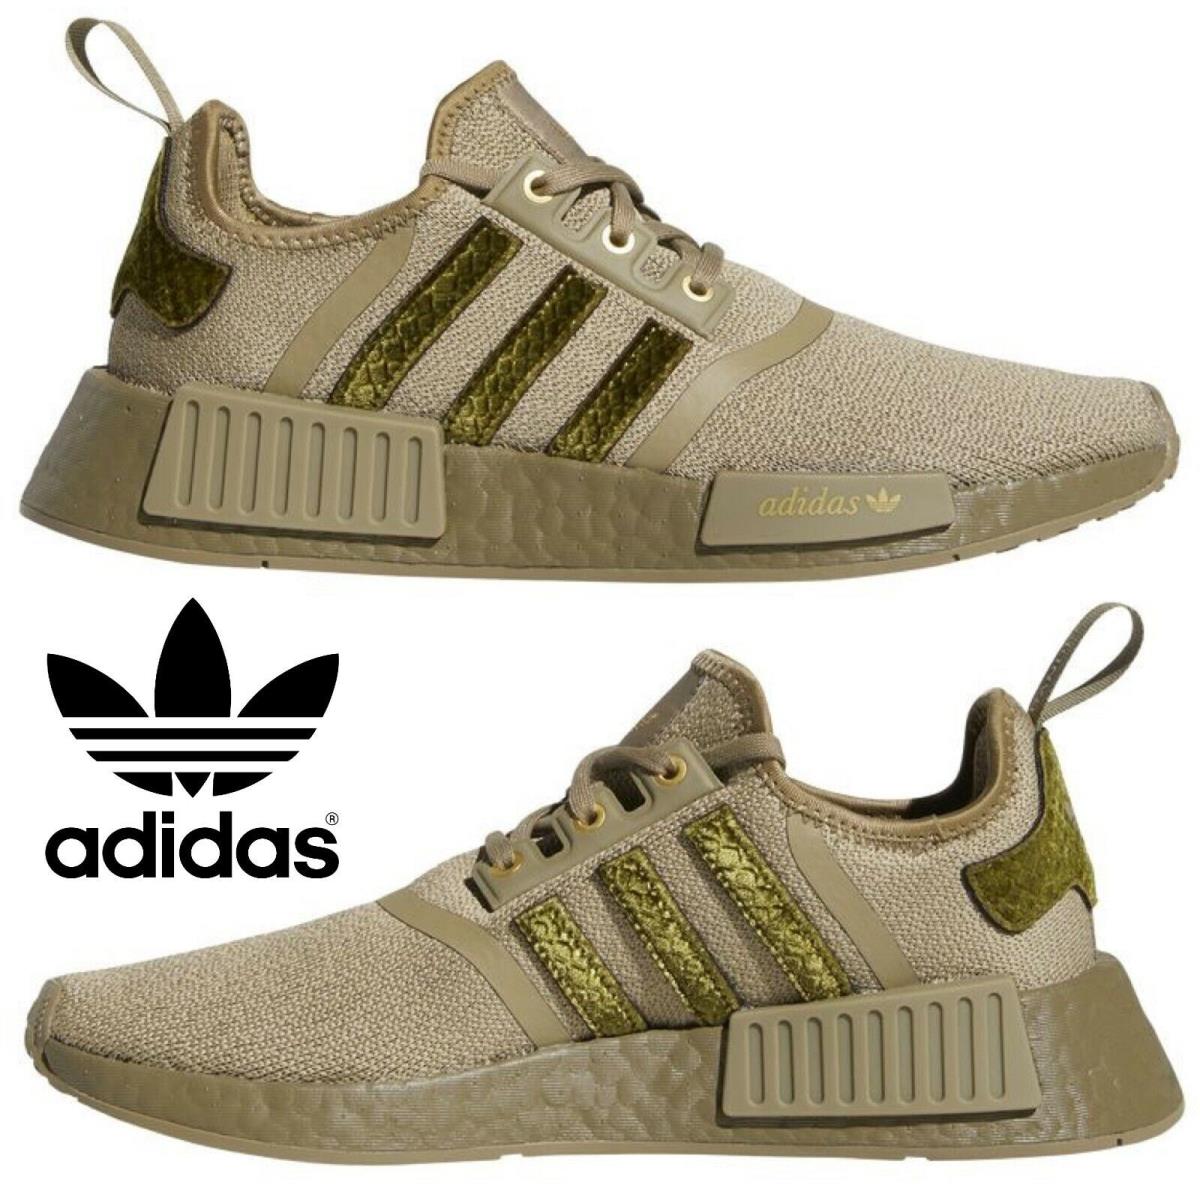 Adidas Originals Nmd R1 Women s Sneakers Casual Shoes Sport Gym Running